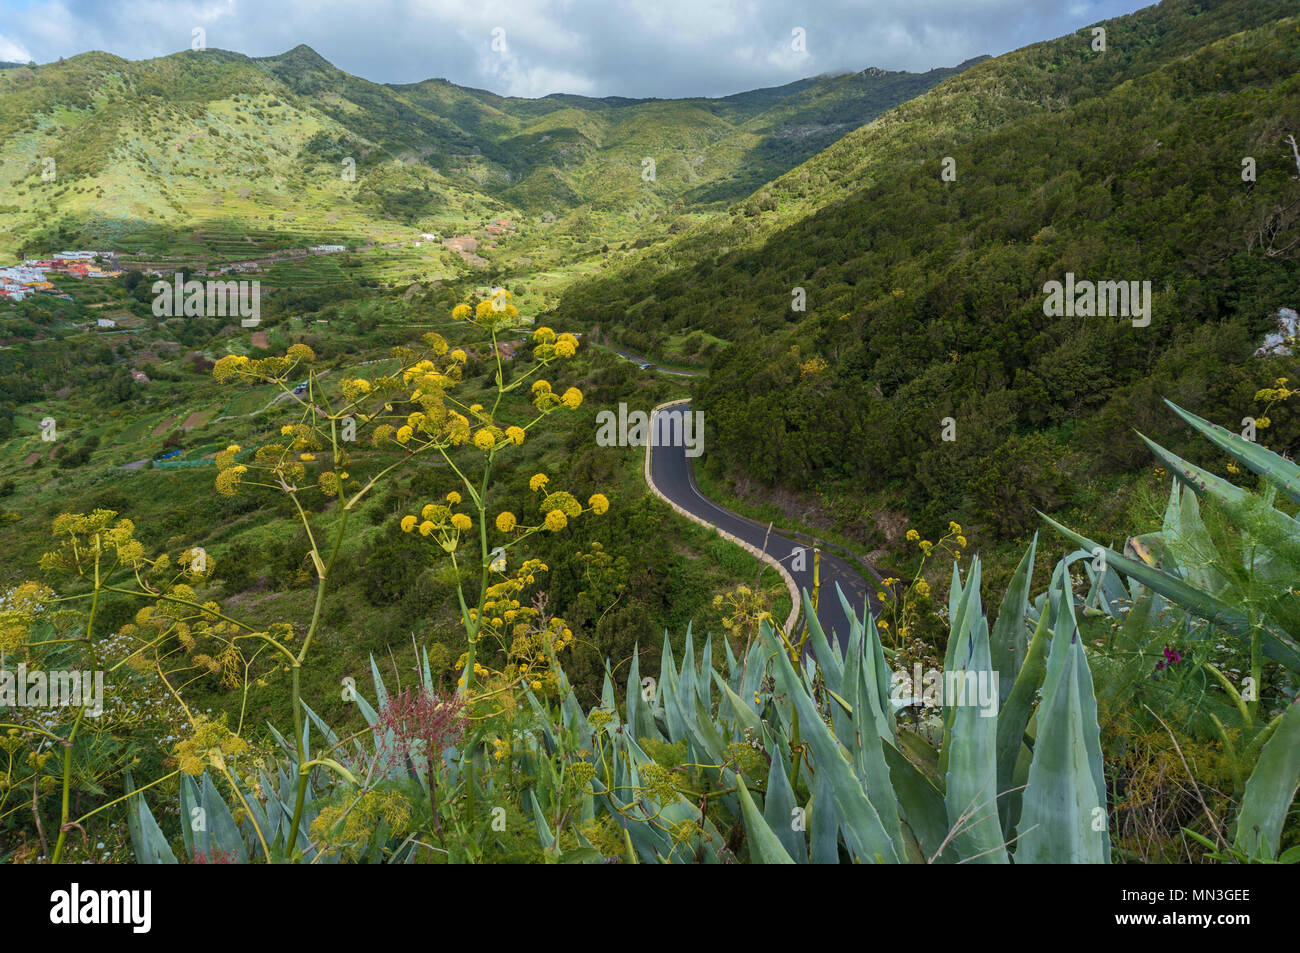 Hilly Landscape with winding road and yellow flowers Stock Photo